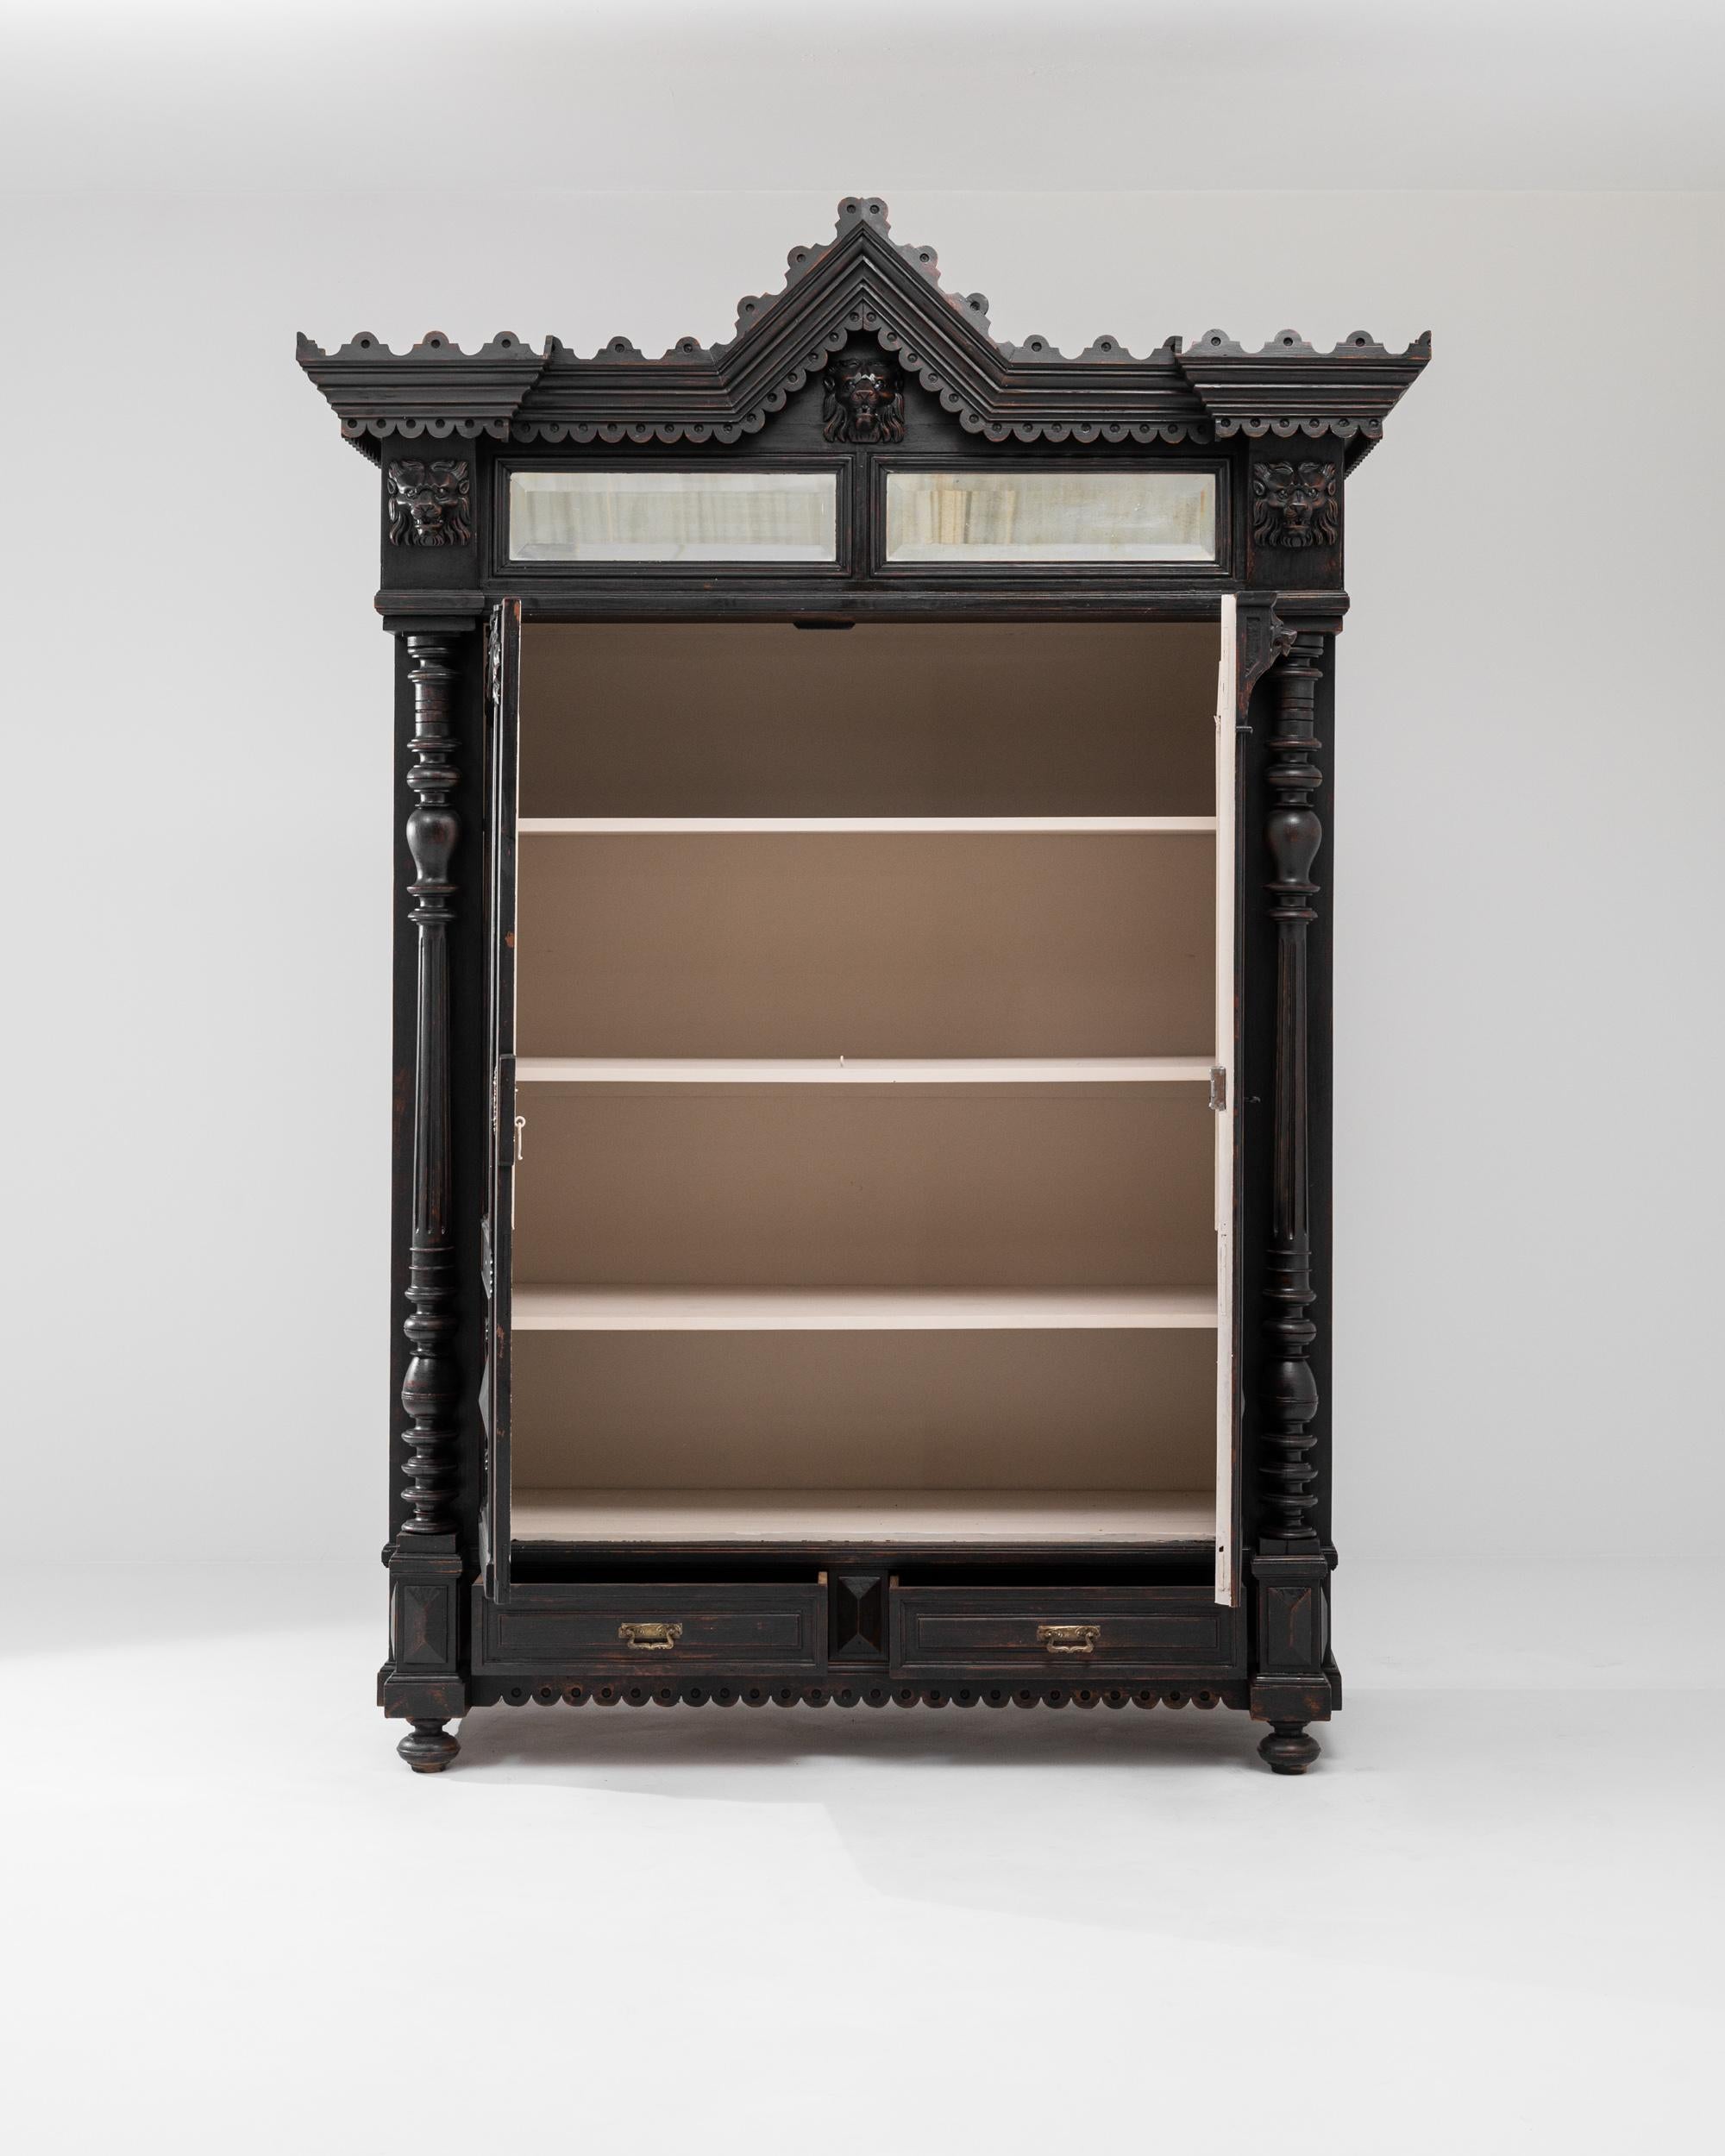 Renaissance Revival Turn of the Century French Neo-Rennaissance Cabinet For Sale